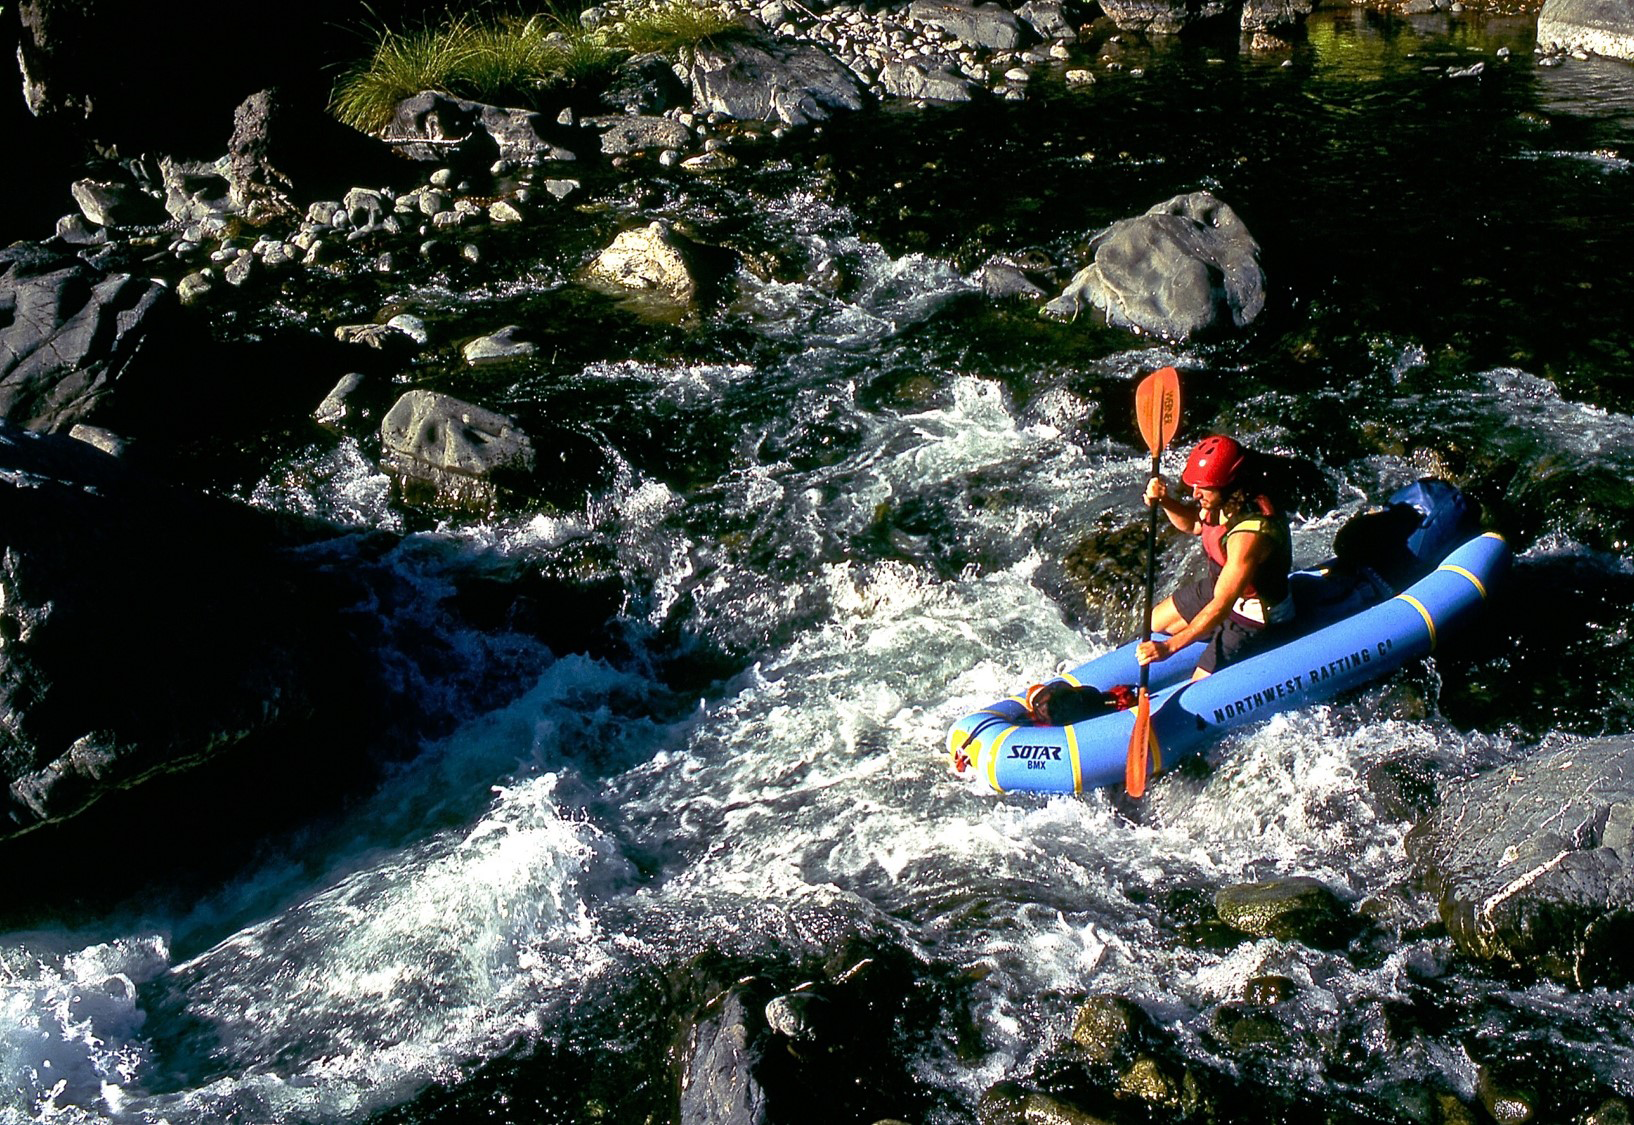 A photo of a kayaker on the Chetco River - Rogue River-Siskiyou National Forest.